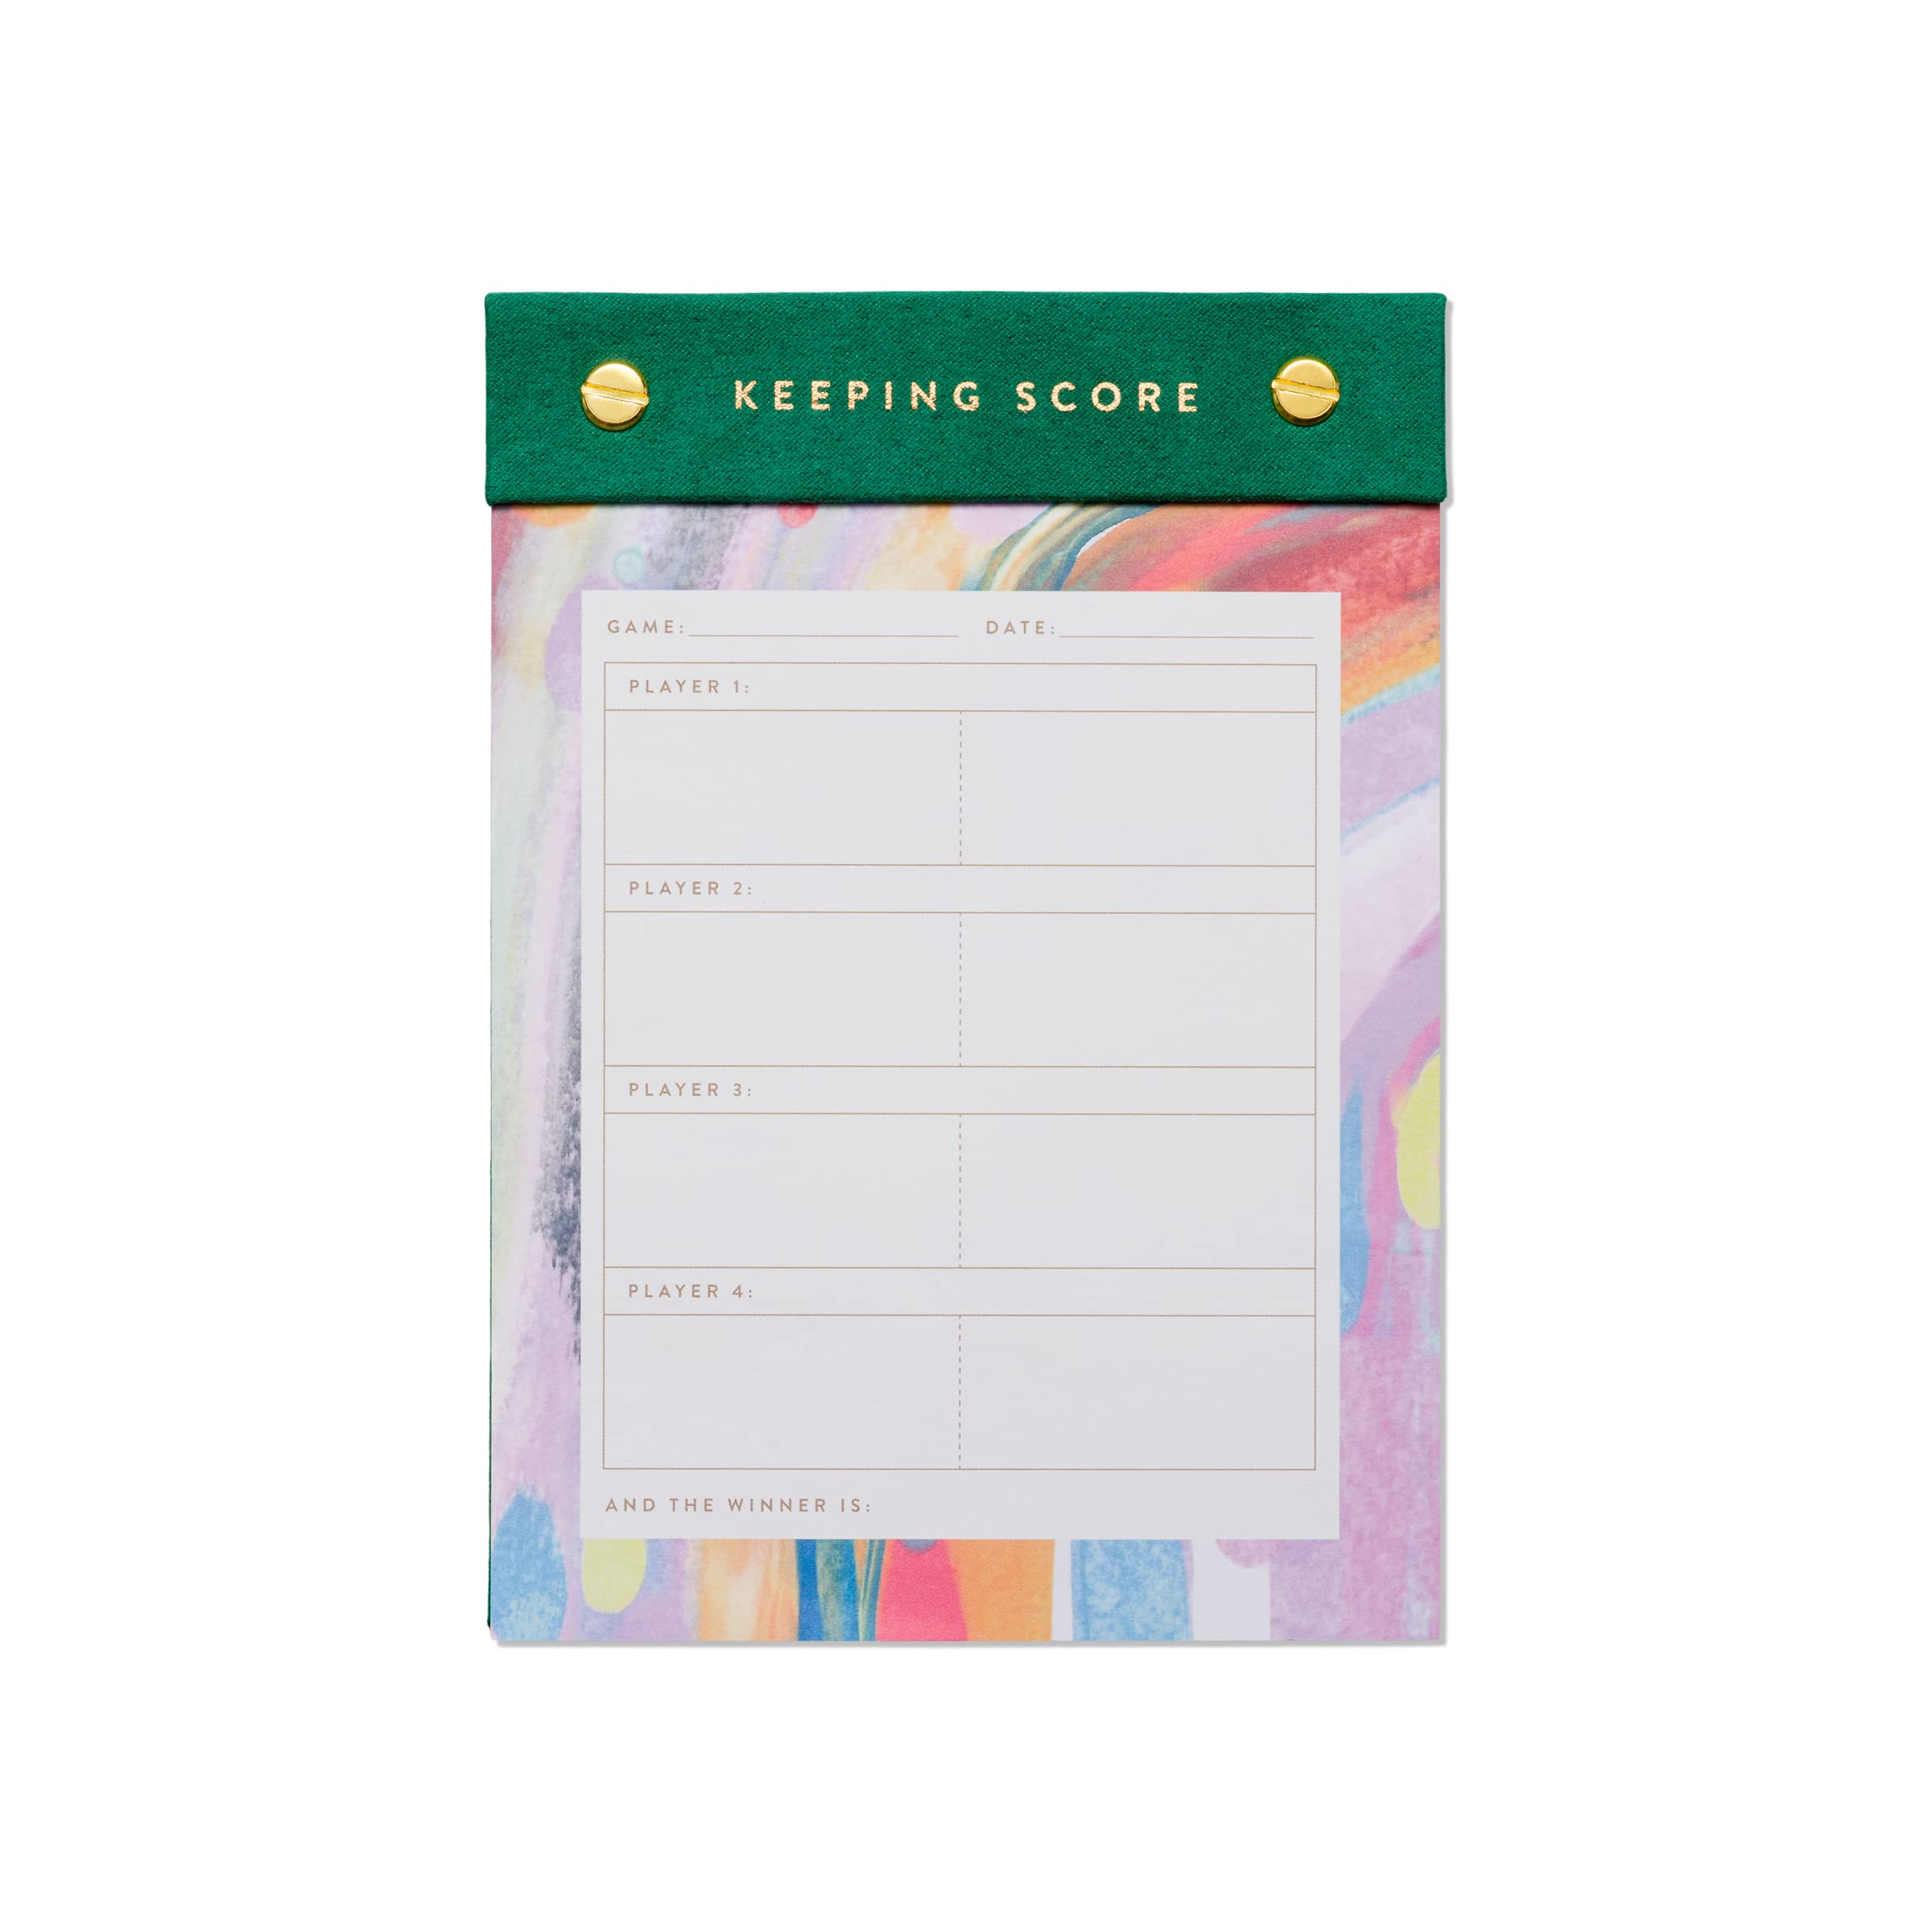 DesignWorks Ink Colorful Score Keeping Notepad for Game Nights - Game Score Sheet Pad Includes 60 Perforated Game Score Sheets with 4-Player Blank Sheets for Score Keeping, Multi (PPB57-2022)